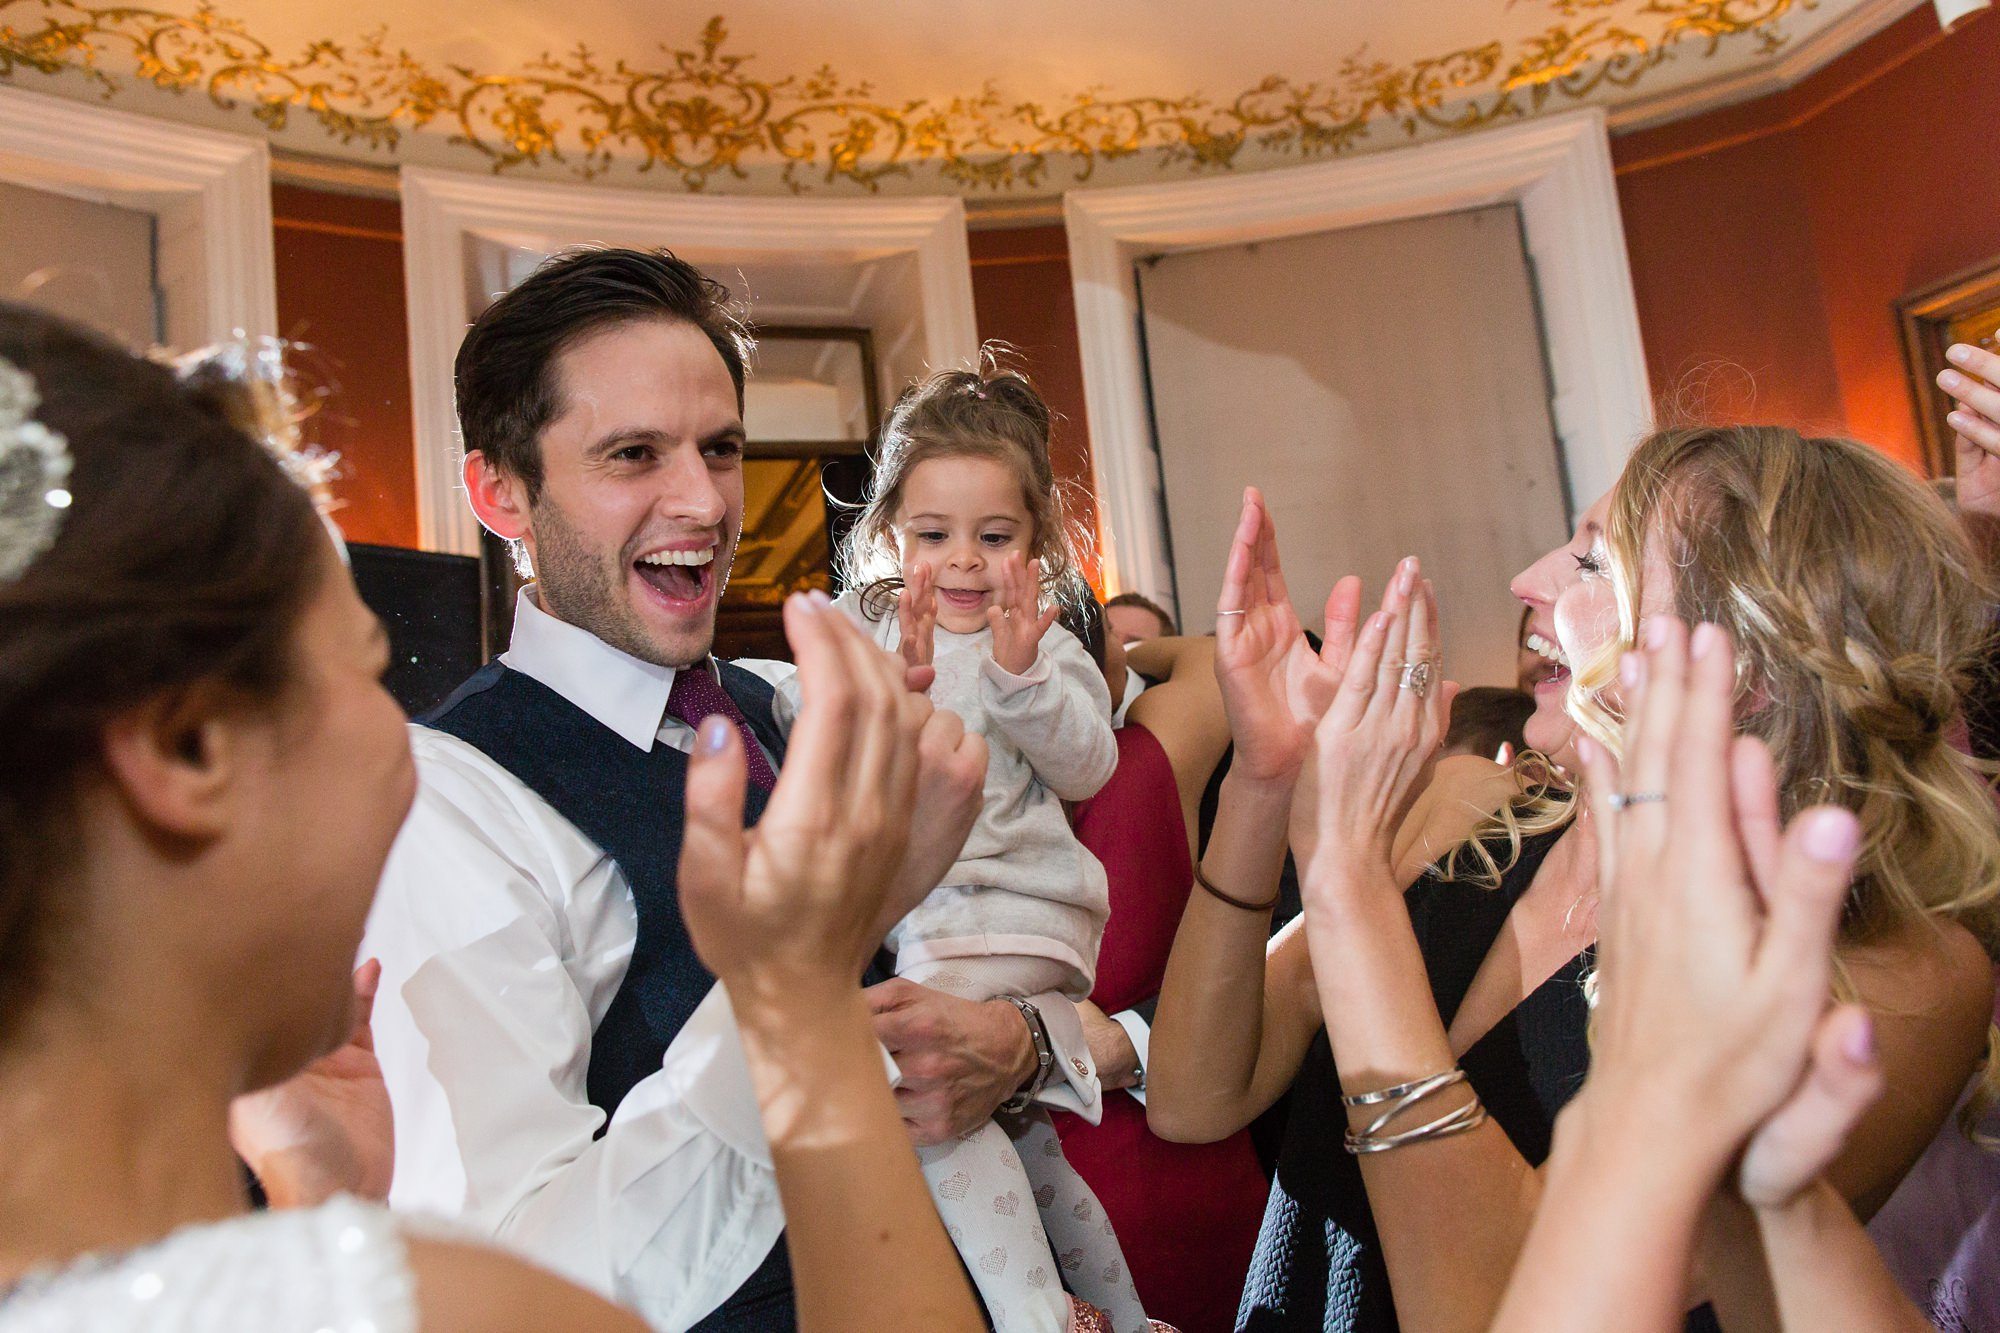 Tips for Children at Weddings - How to include kids without the stress